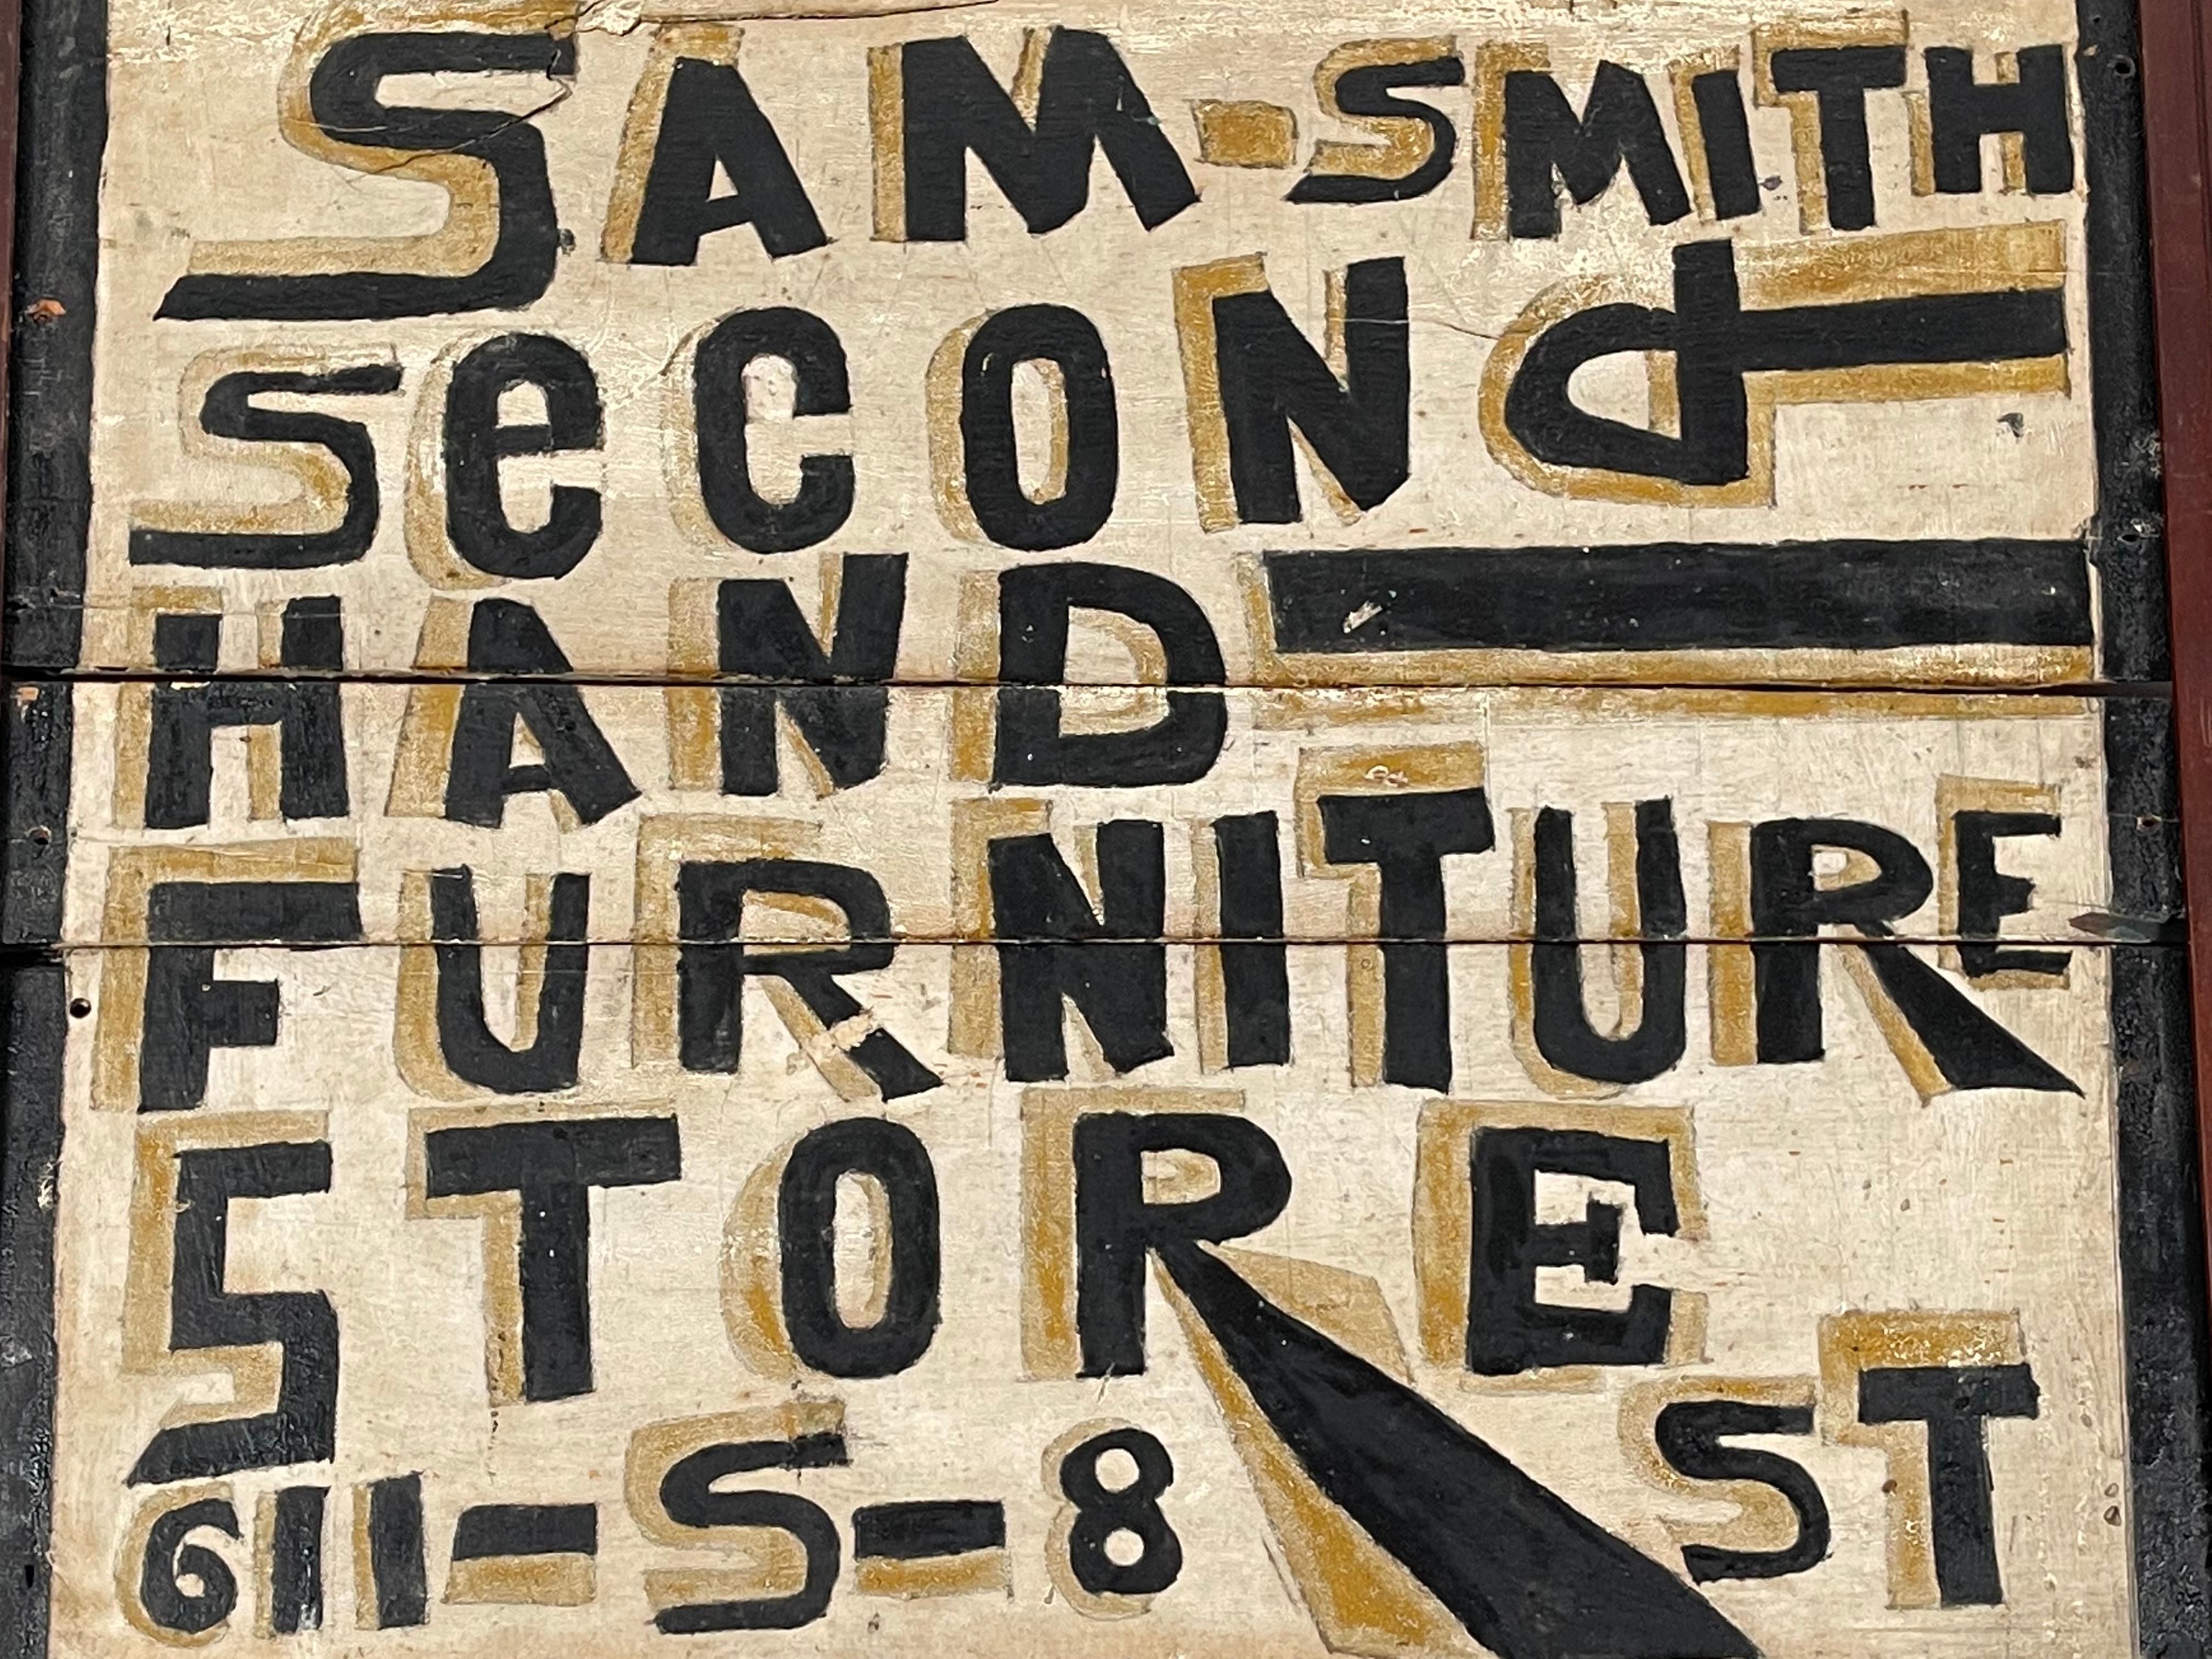 An unusual and wonderfully graphic Folk Art hand painted trade sign advertising Sam - Smith Second Hand Furniture Store. 611 S 8 St, hand painted on wood in bold black lettering with ochre-tan shadowing on a cream ground. Original paint on wood.